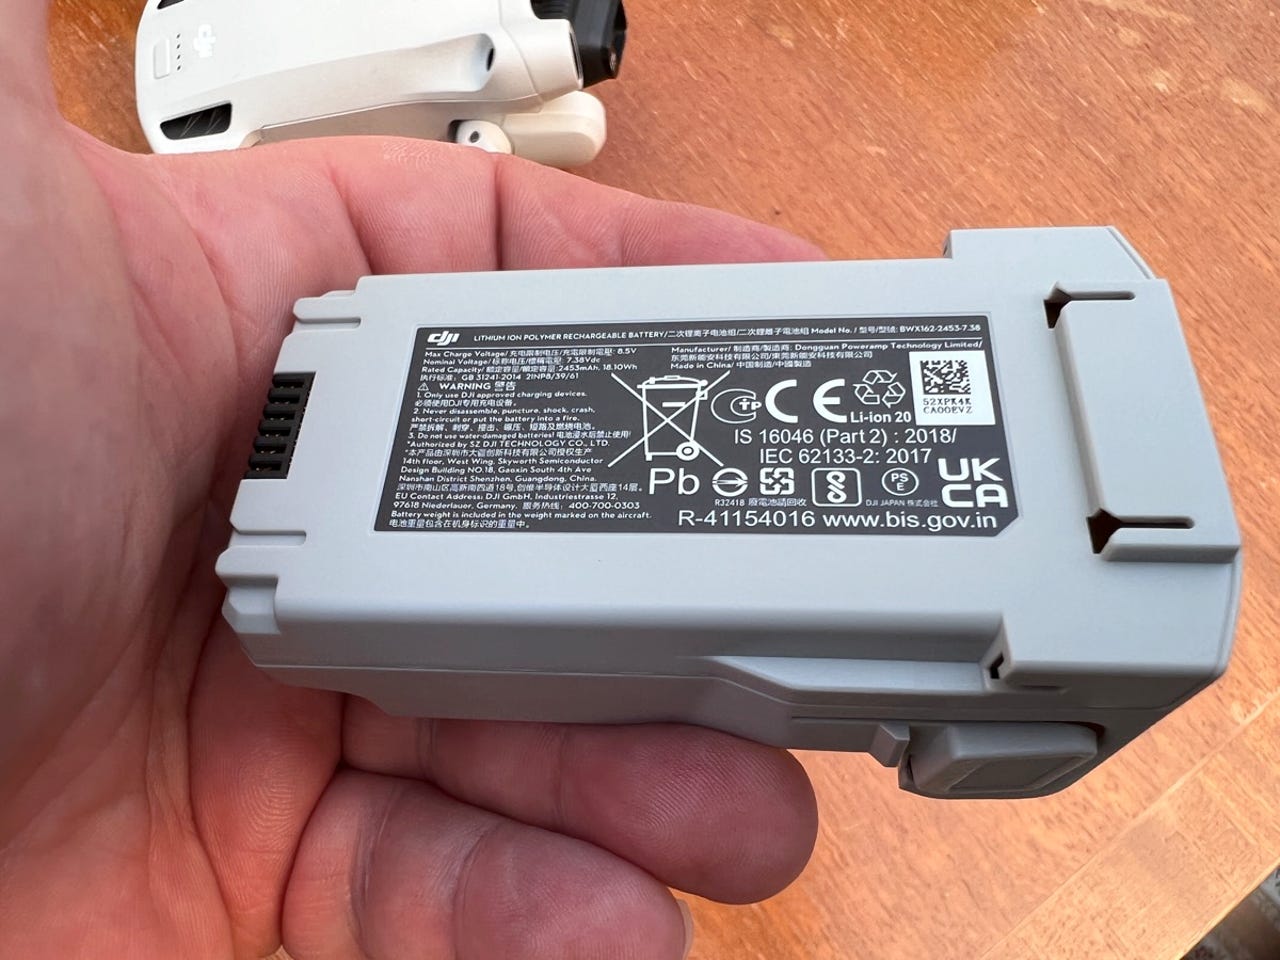 DJI Mini 3 Pro  Why YOU CAN'T BUY The Battery Plus In UK / Europe